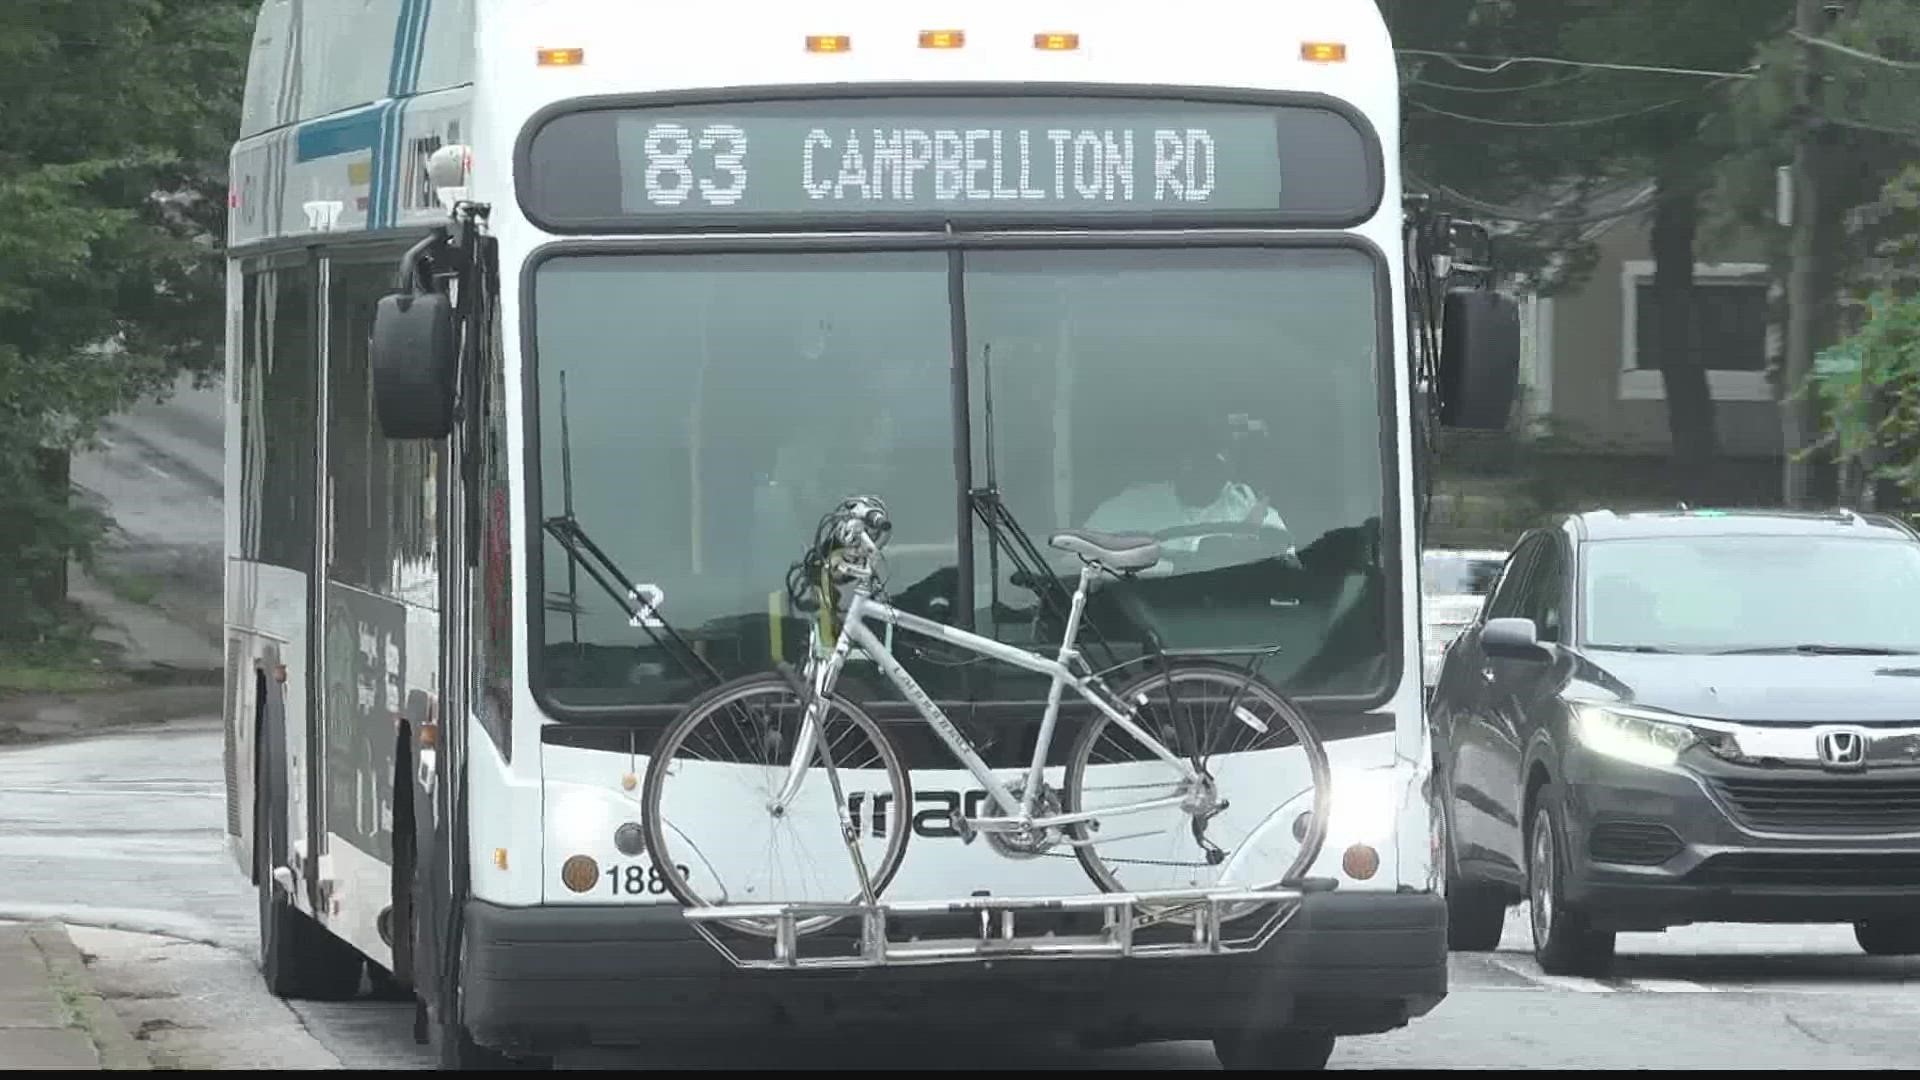 The debate over how to get around town is heated over on Campbellton Road.